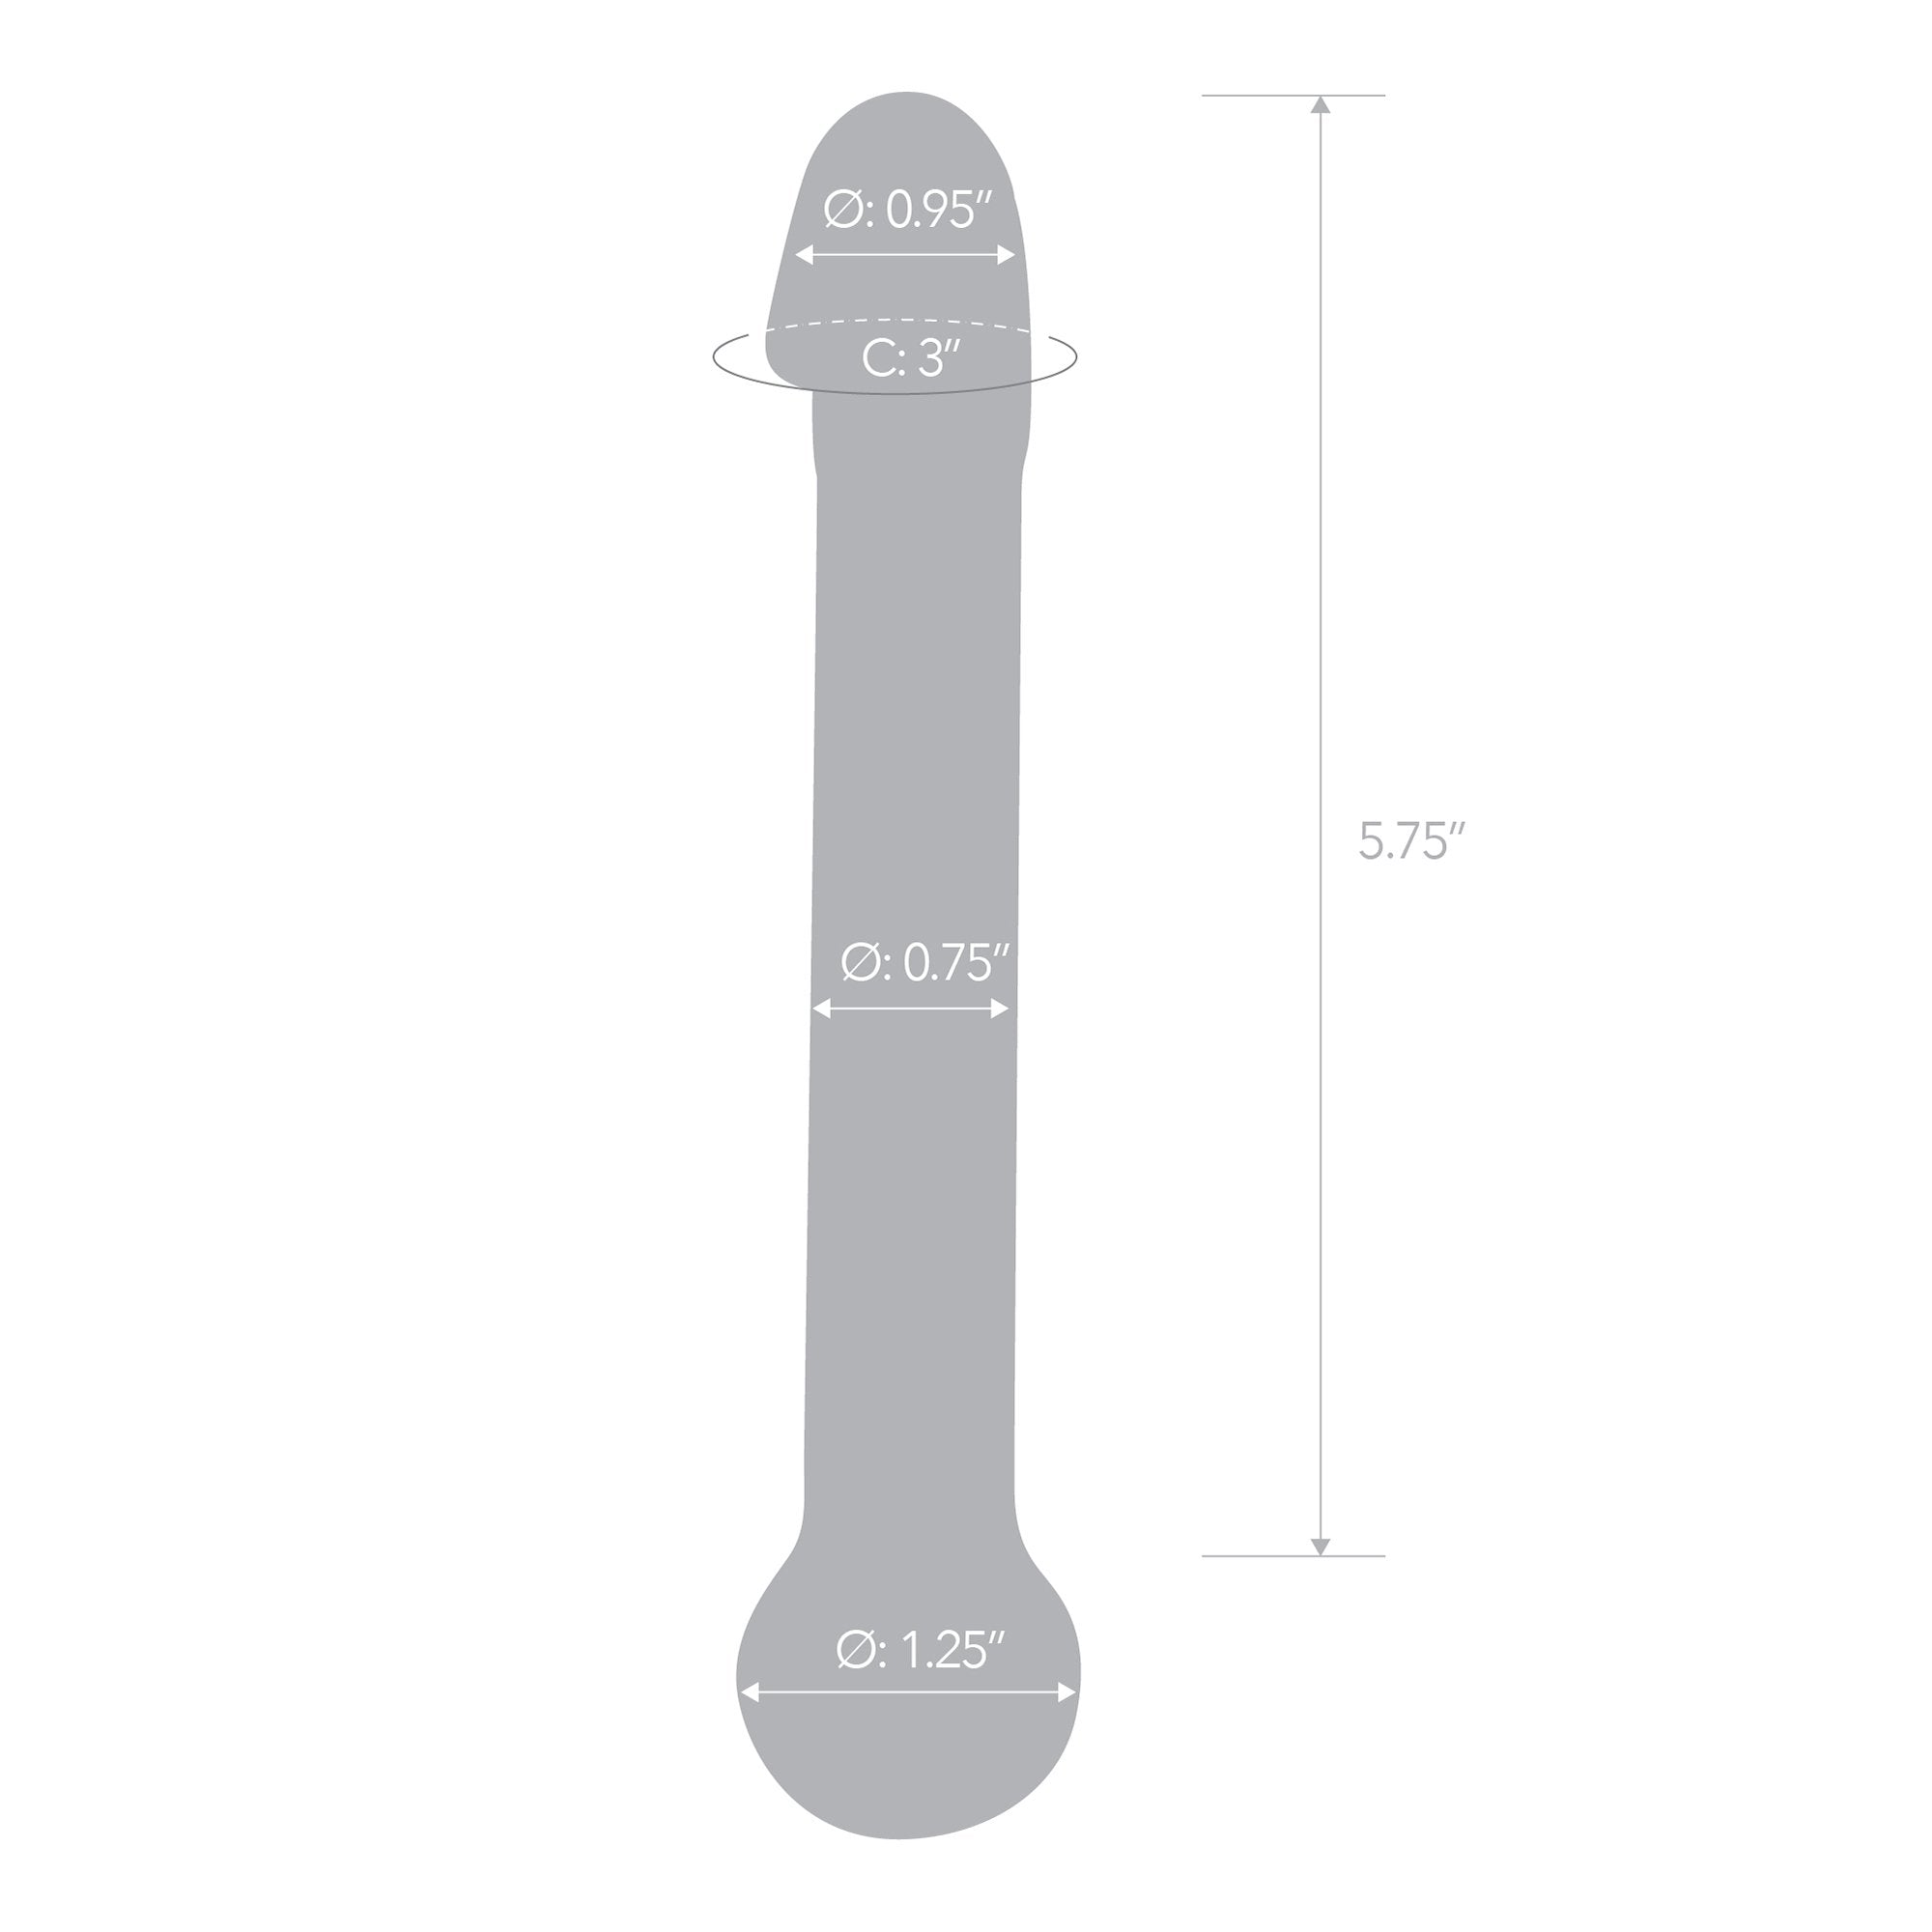 Specifications of the Gläs 7 inch Realistic Head Glass Dildo